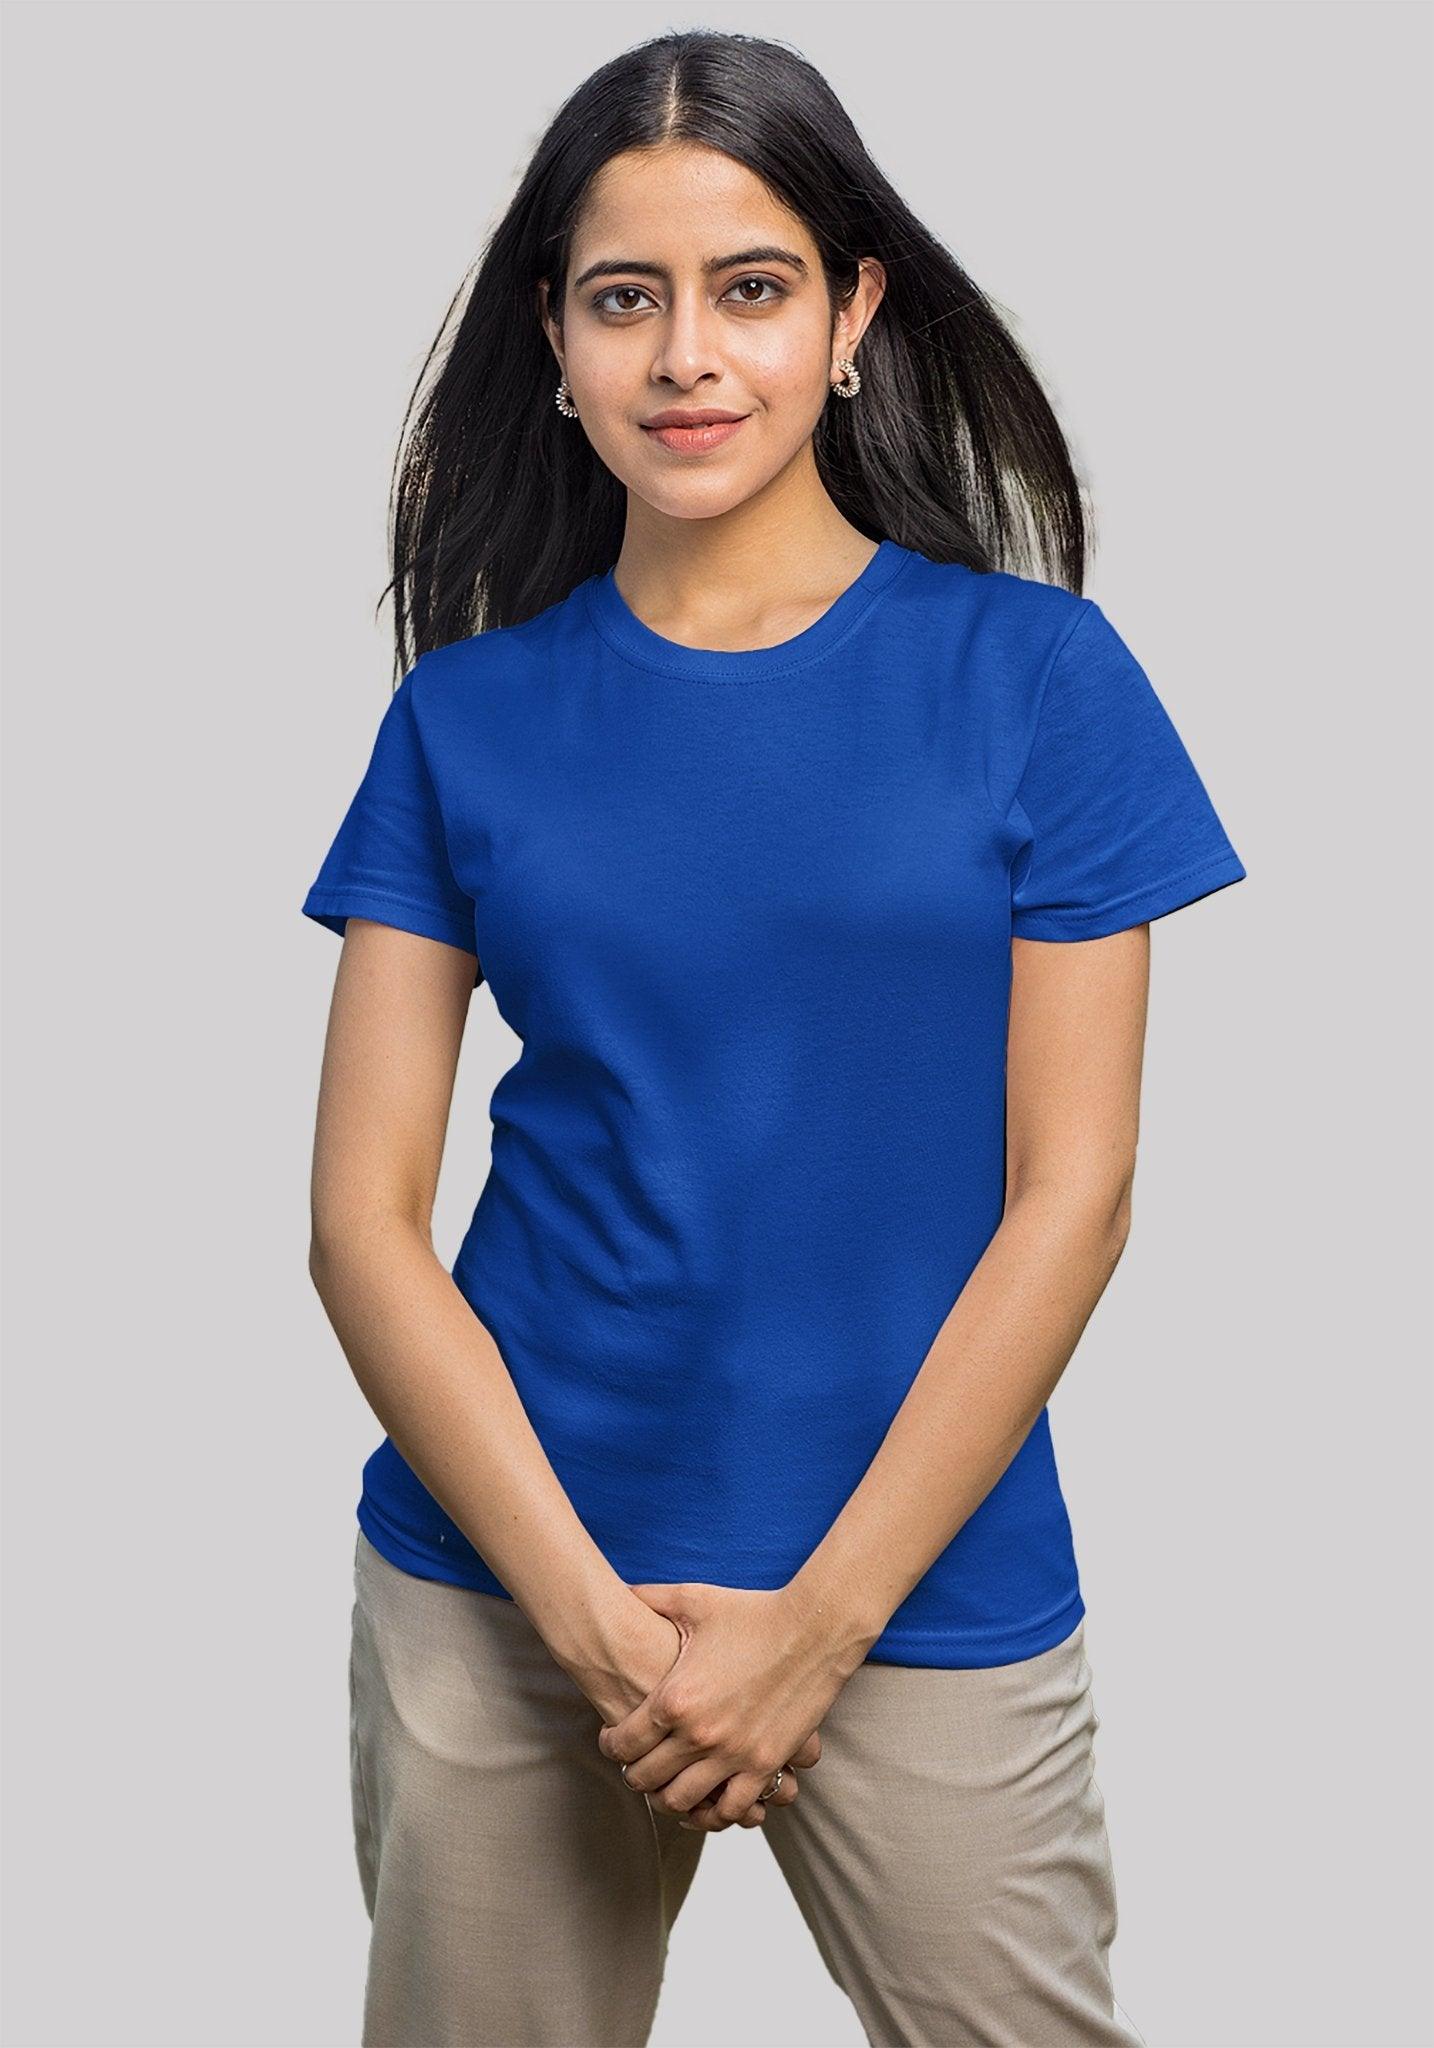 Solid Plain T Shirt Combo For Women In Blue Colour Variant